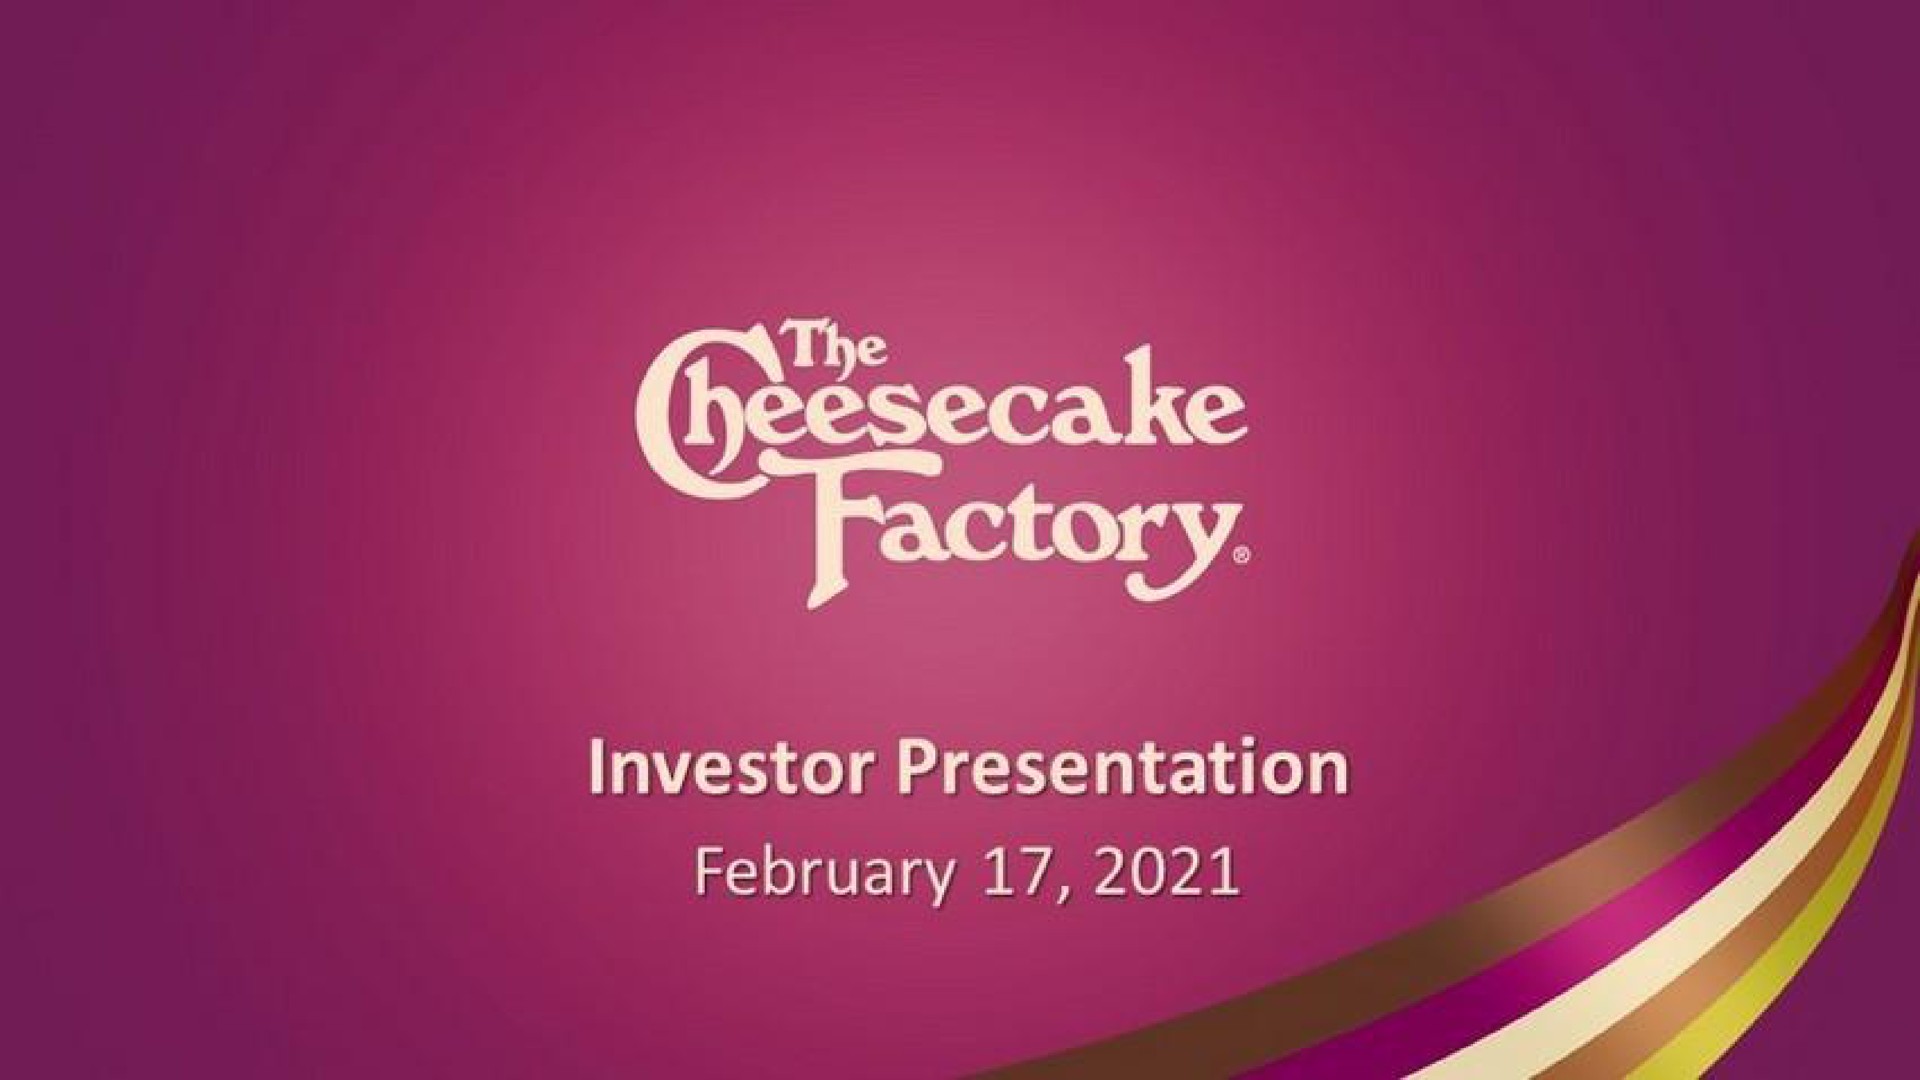 by investor presentation | Cheesecake Factory